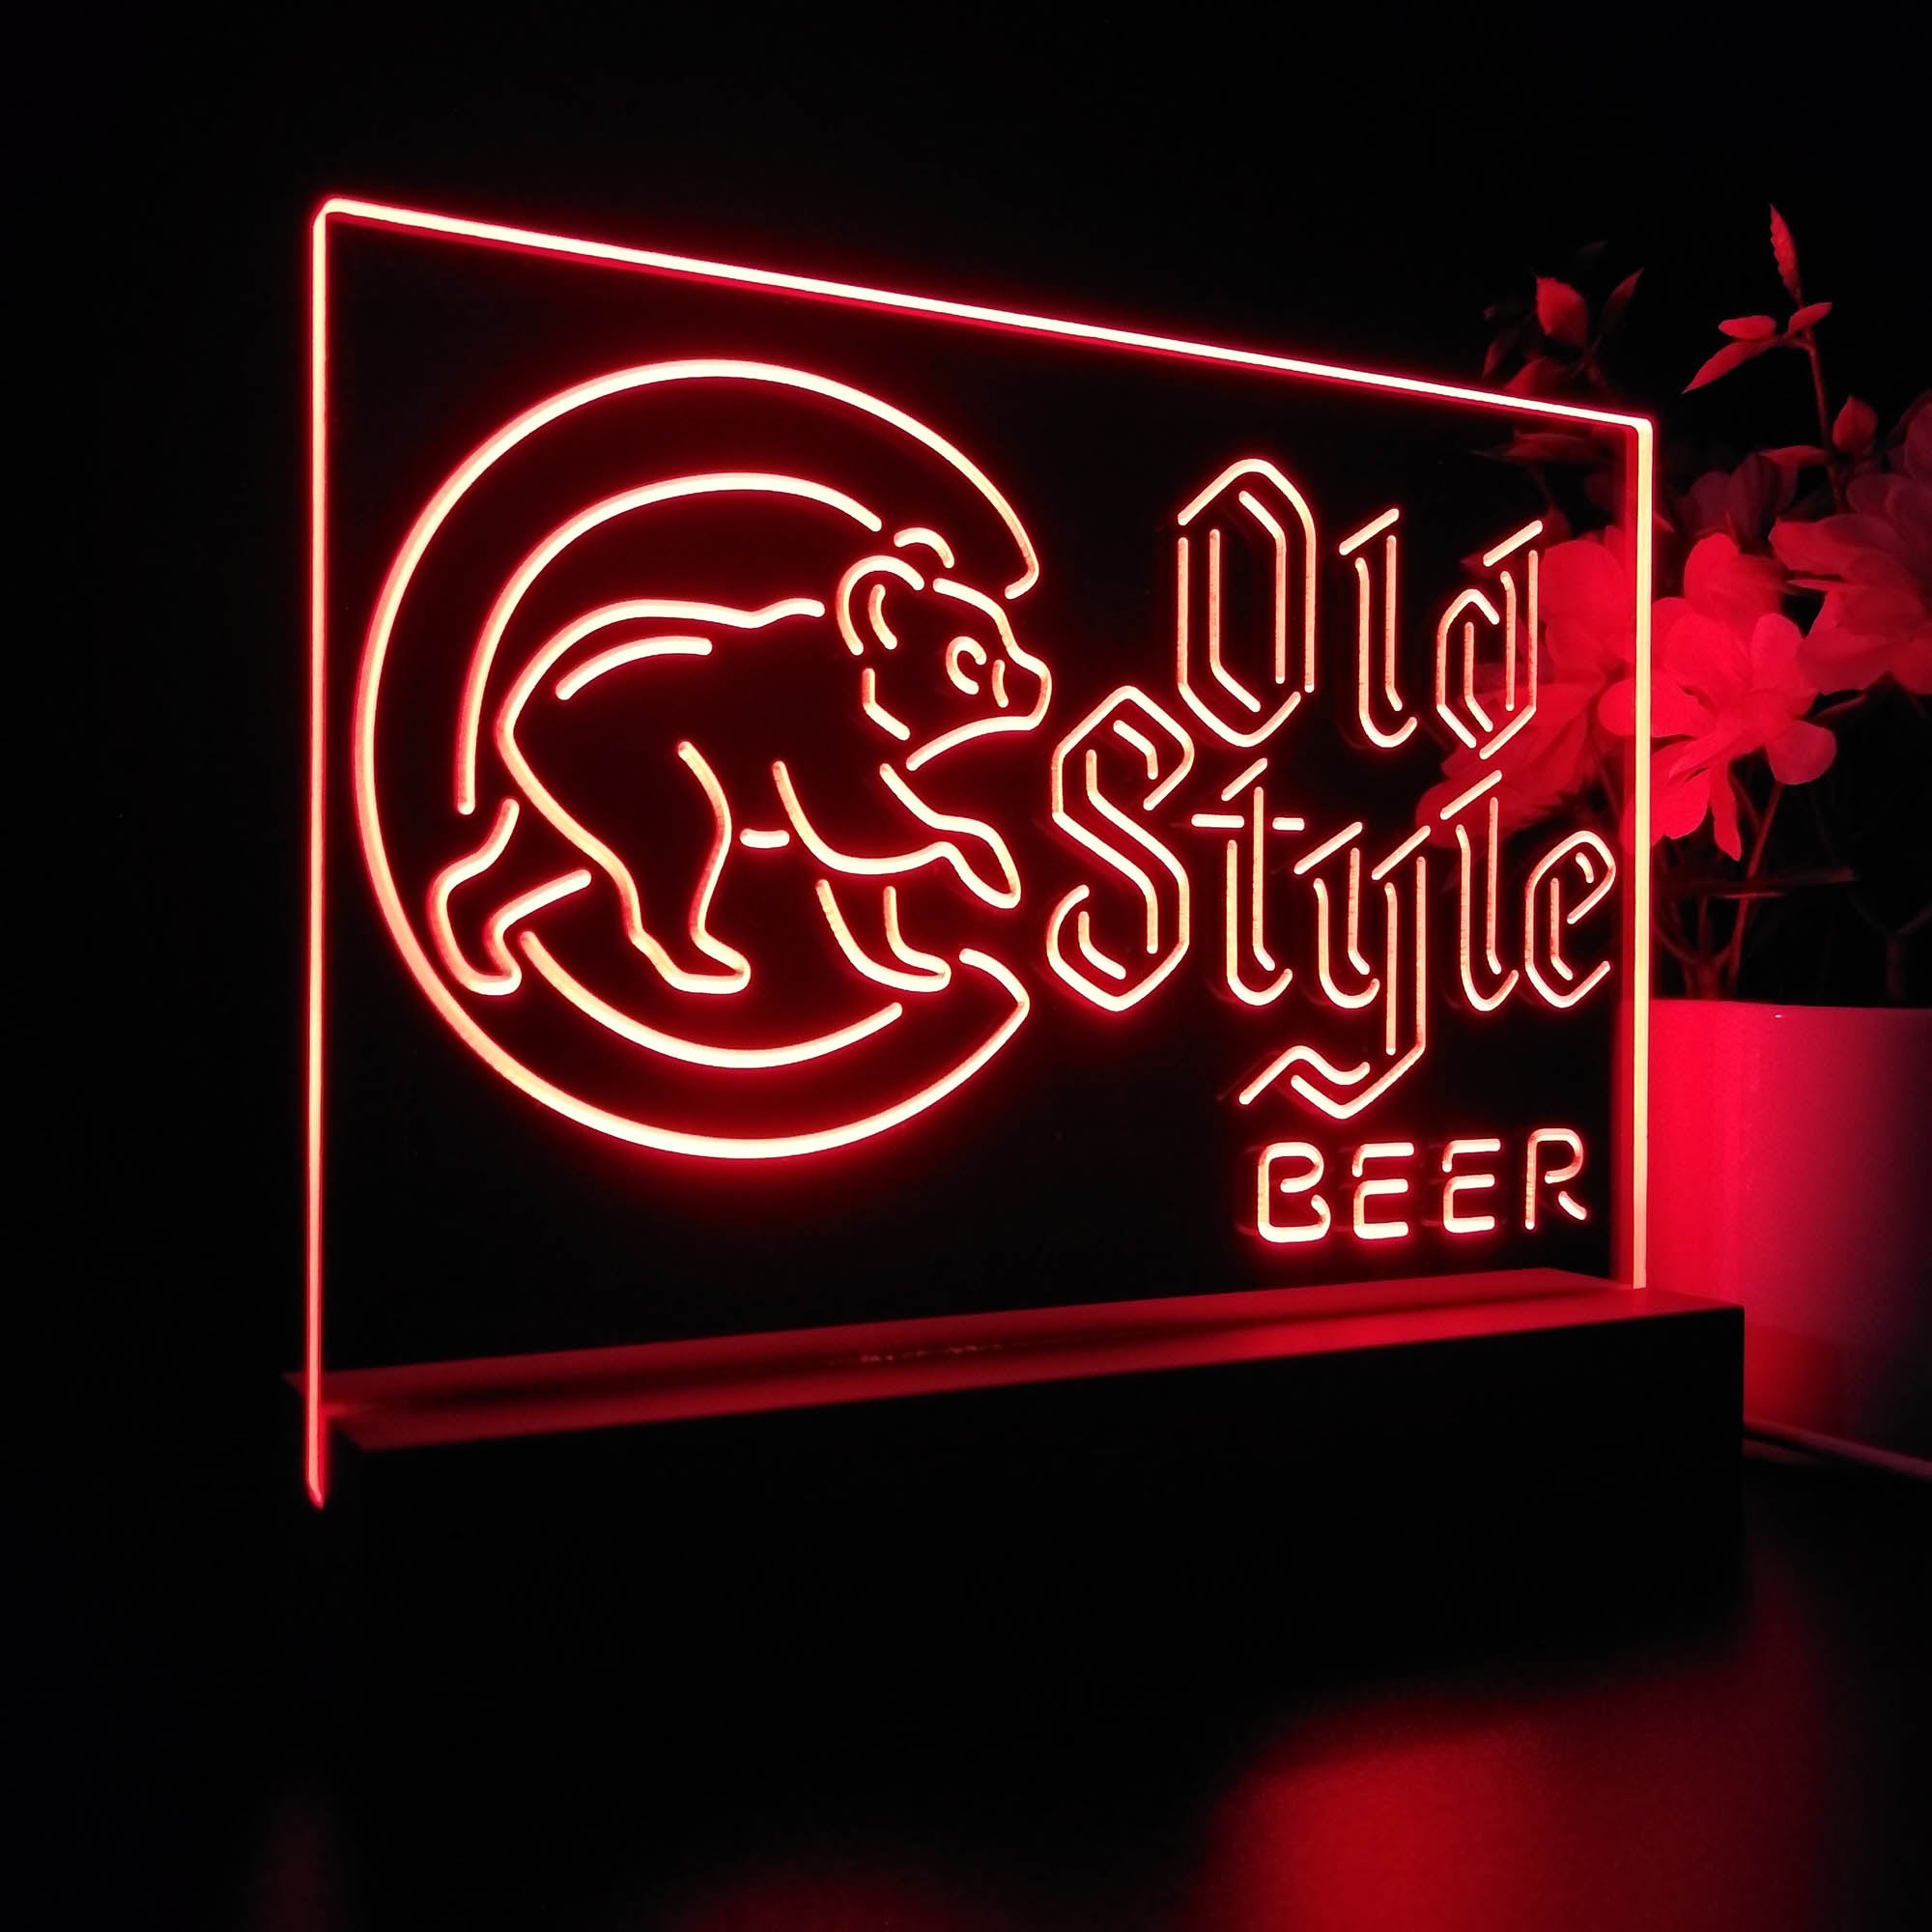 Cubs Old Style Beer Bar Night Light 3D Illusion Lamp Home Bar Decor